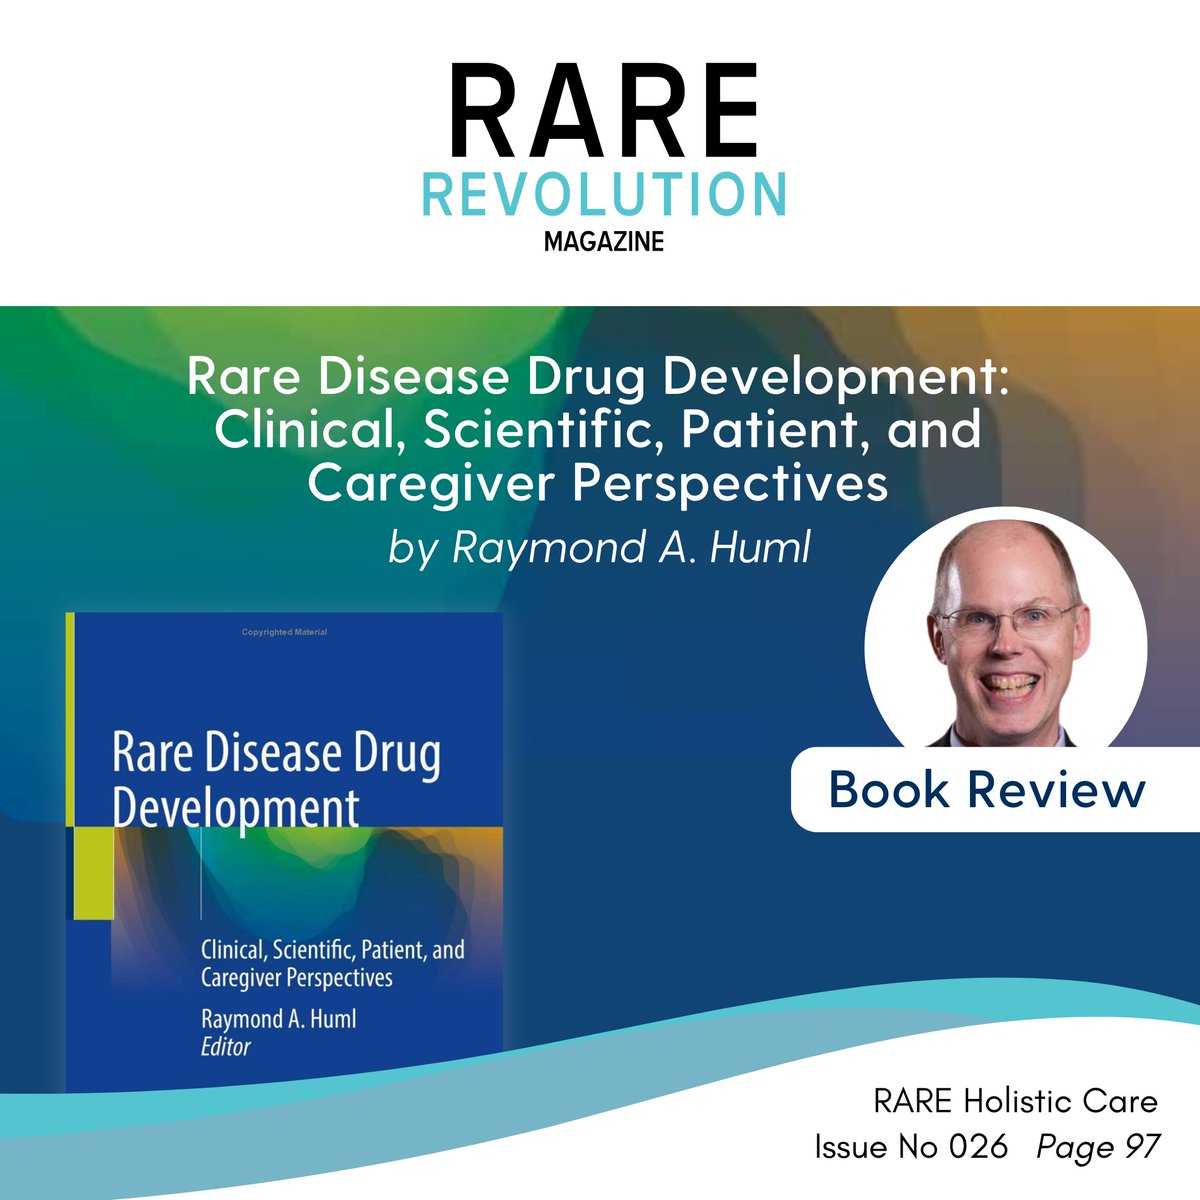 Raymond Huml is the father of two children with #FSHD and he is also the head of @SyneosHealth #RareDiseaseConsortium. In his book he brings together an impressive range of experts to give their perspectives on the topic of #RareDiseaseDrugDevelopement. bit.ly/RareDiseaseDru…